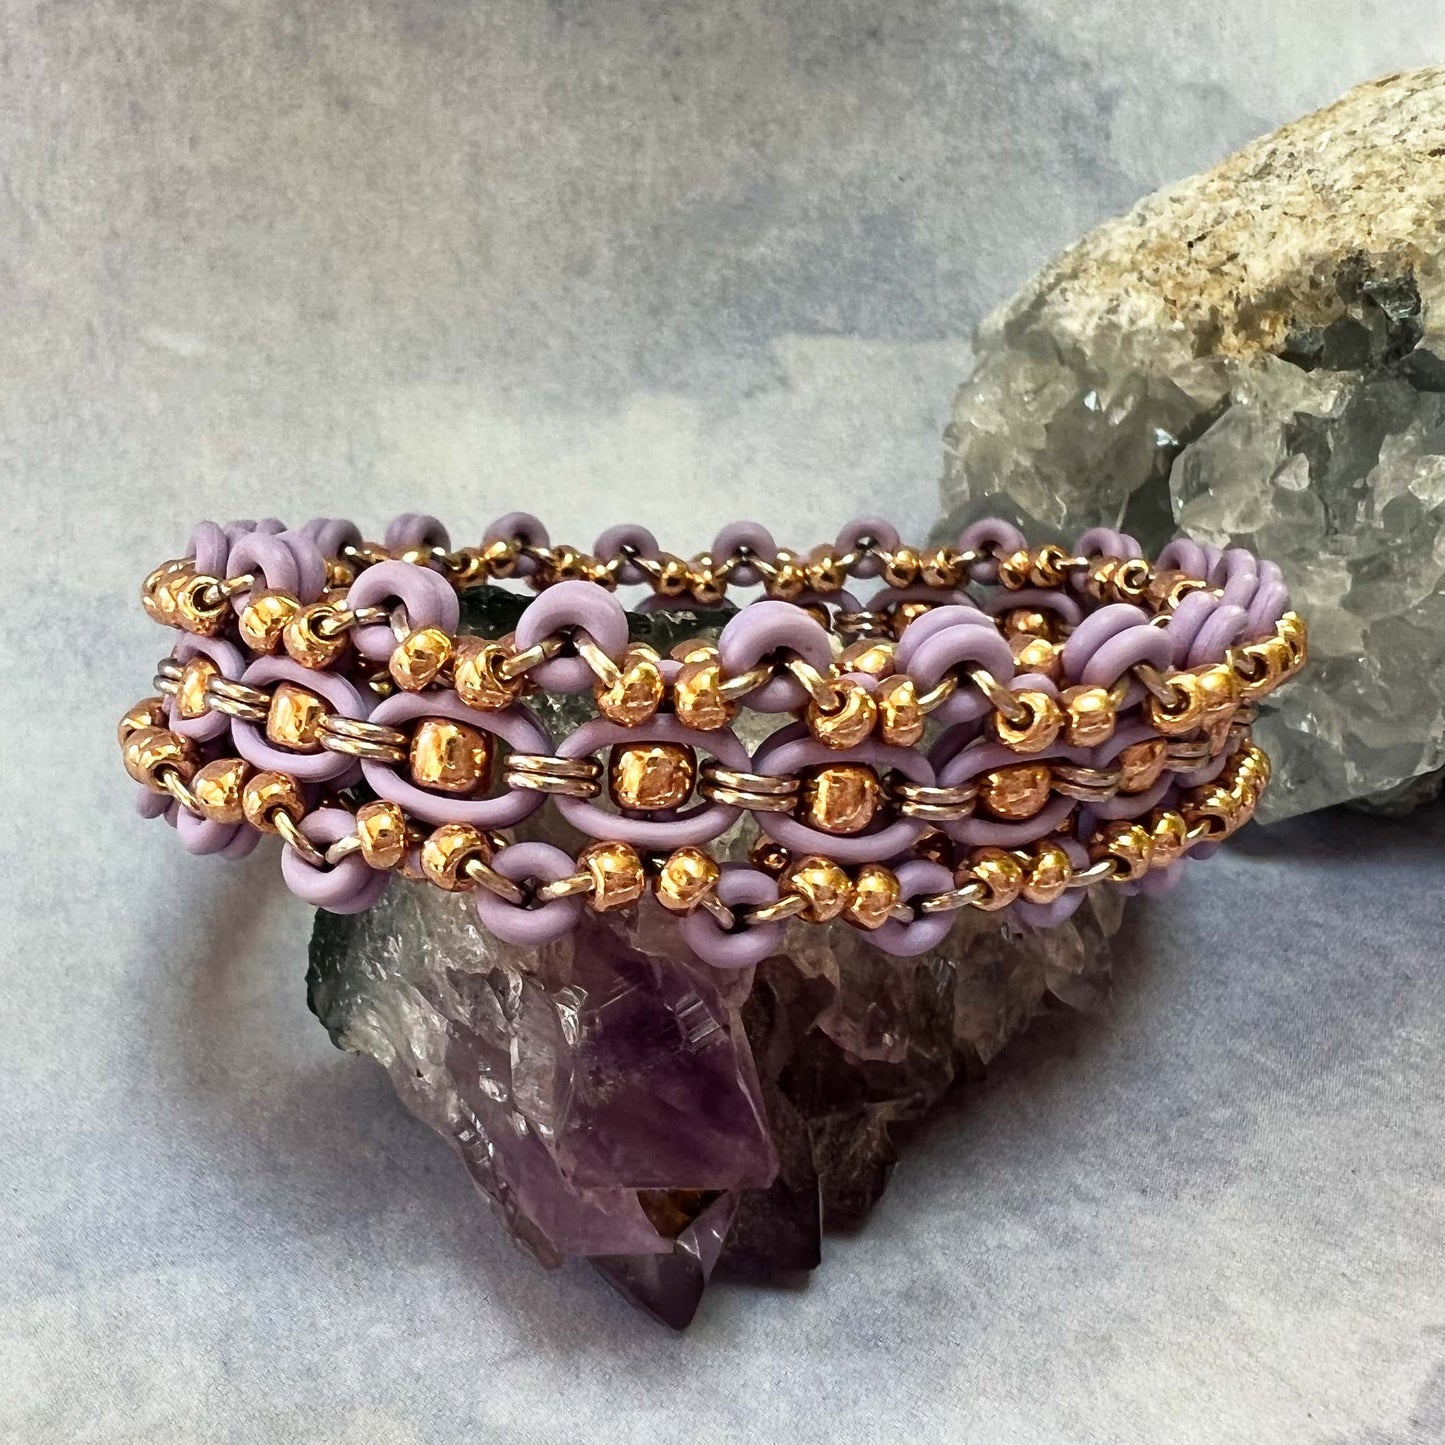 Lacy Geometric Beaded Stretch Bracelet Kit with Video Class - Pastel Purple & Rose Gold